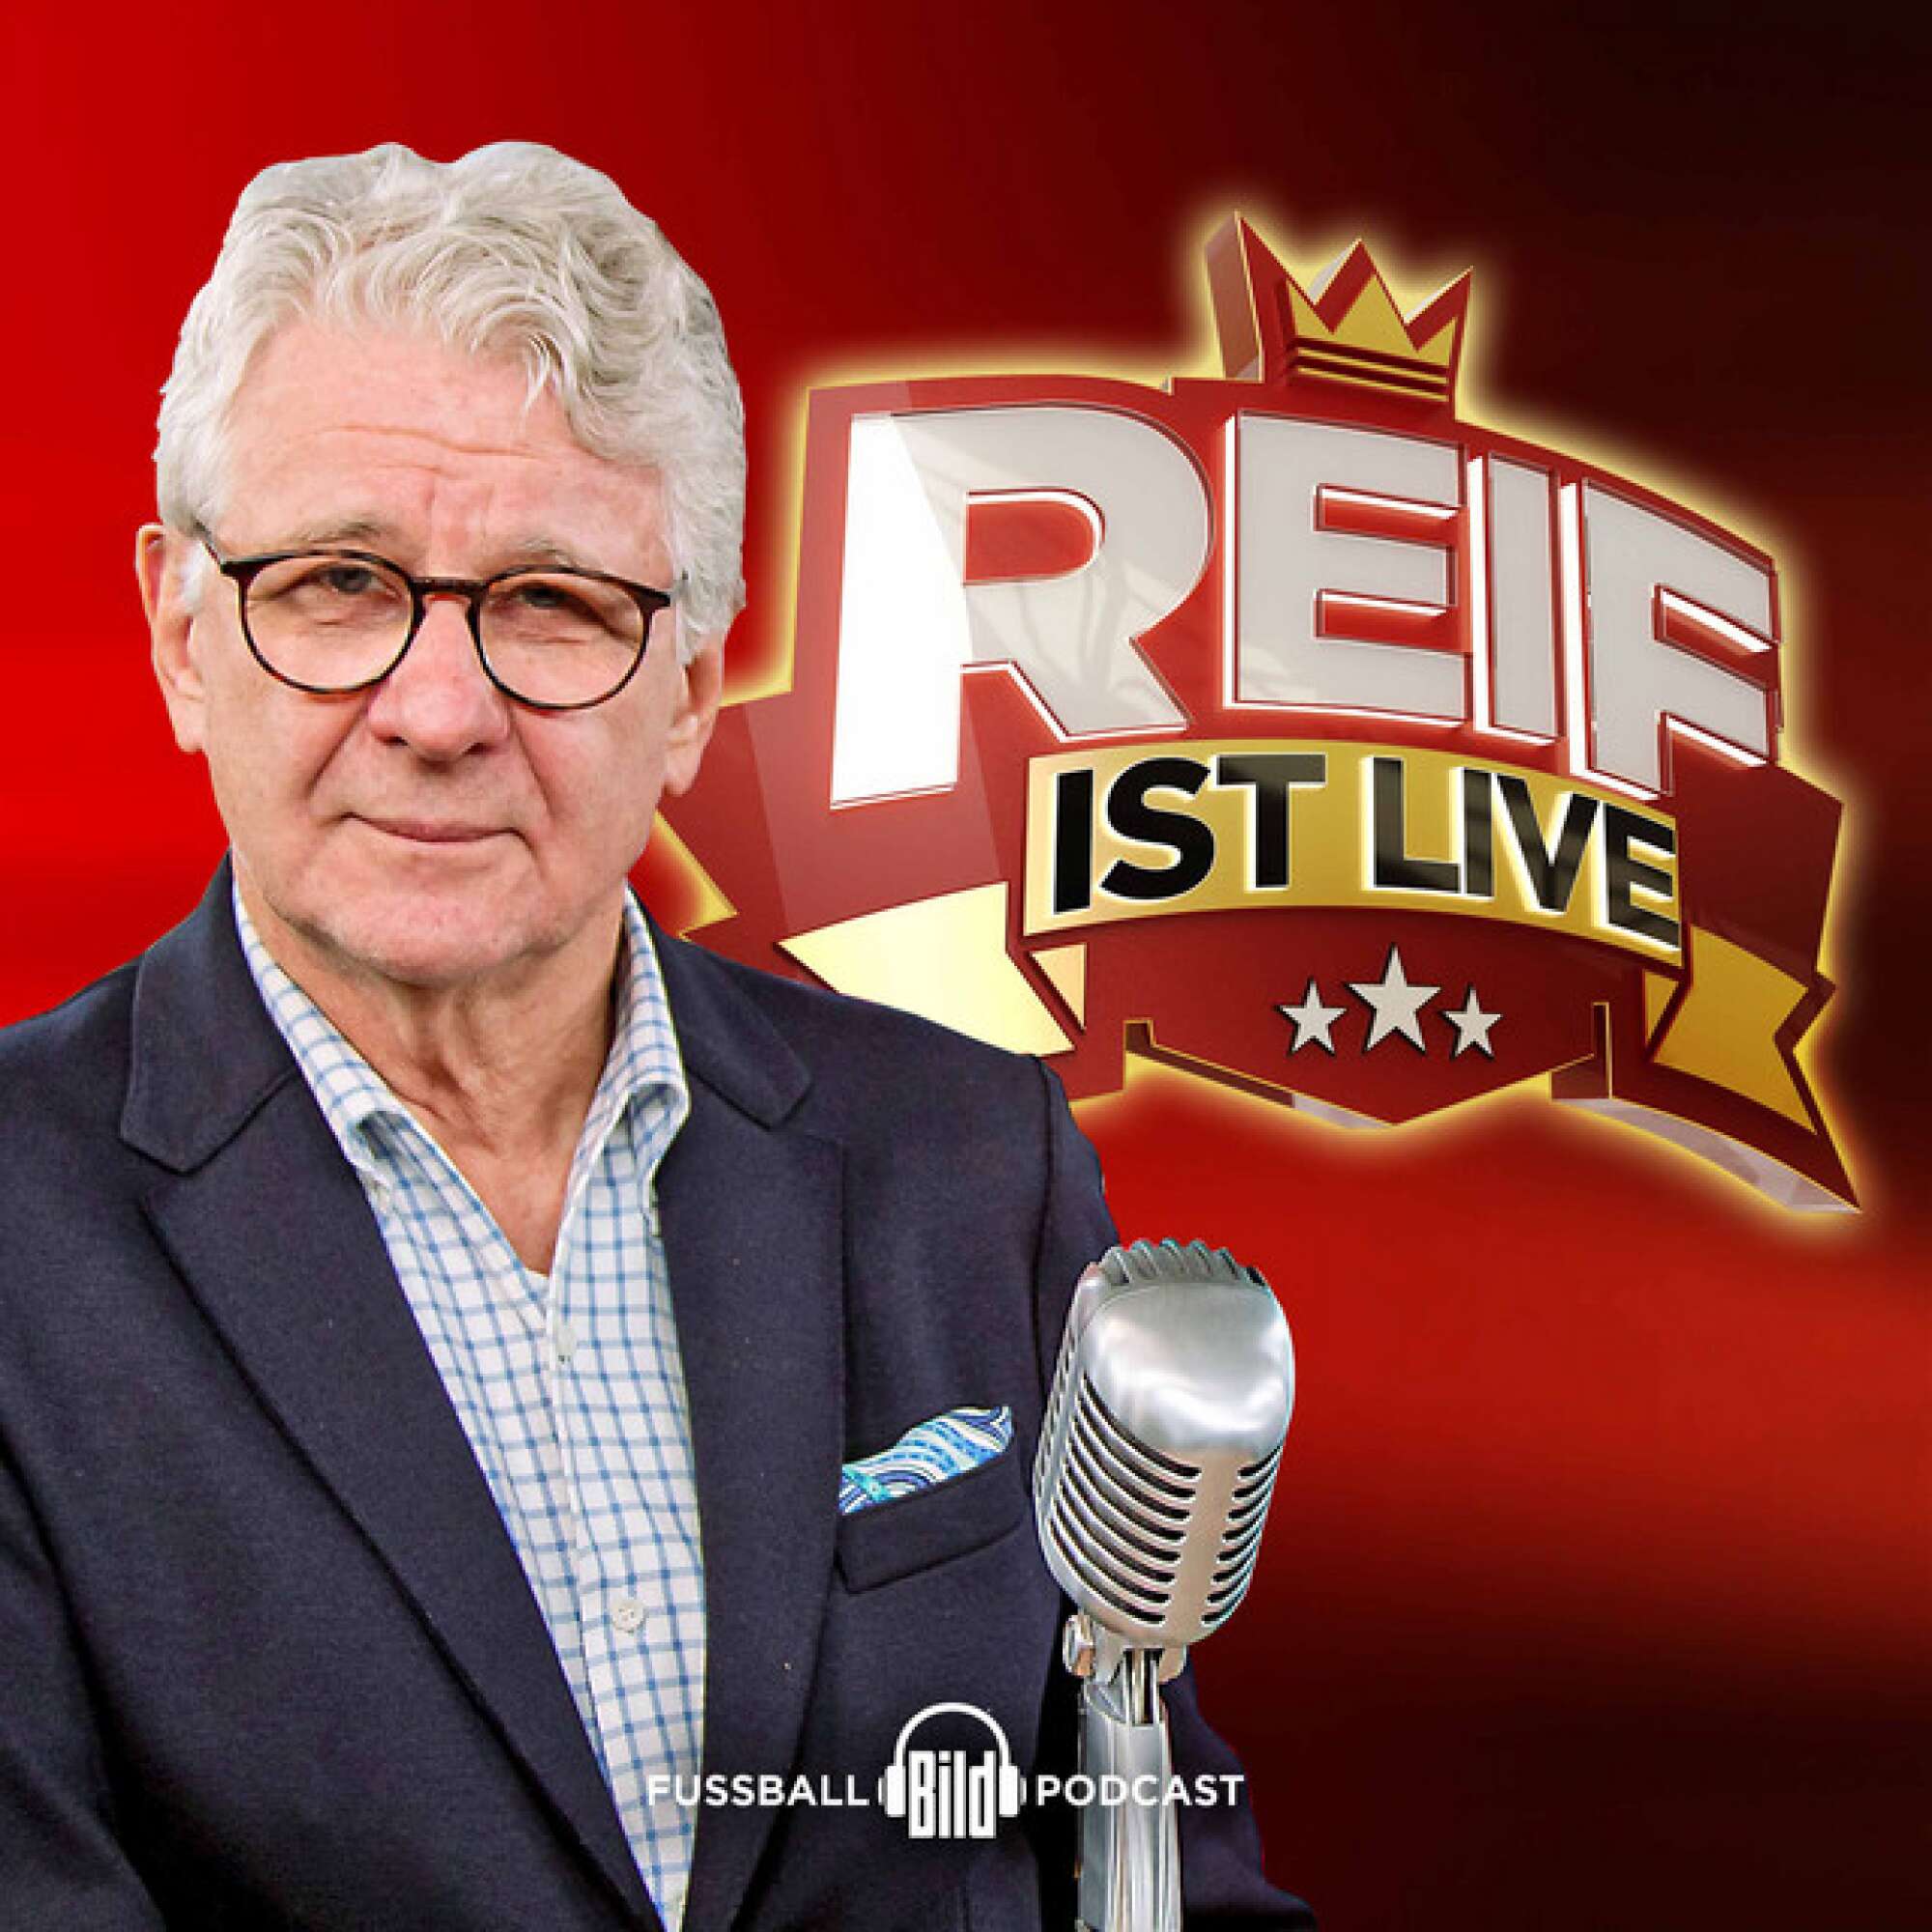 Podcast-Cover "Reif ist live"